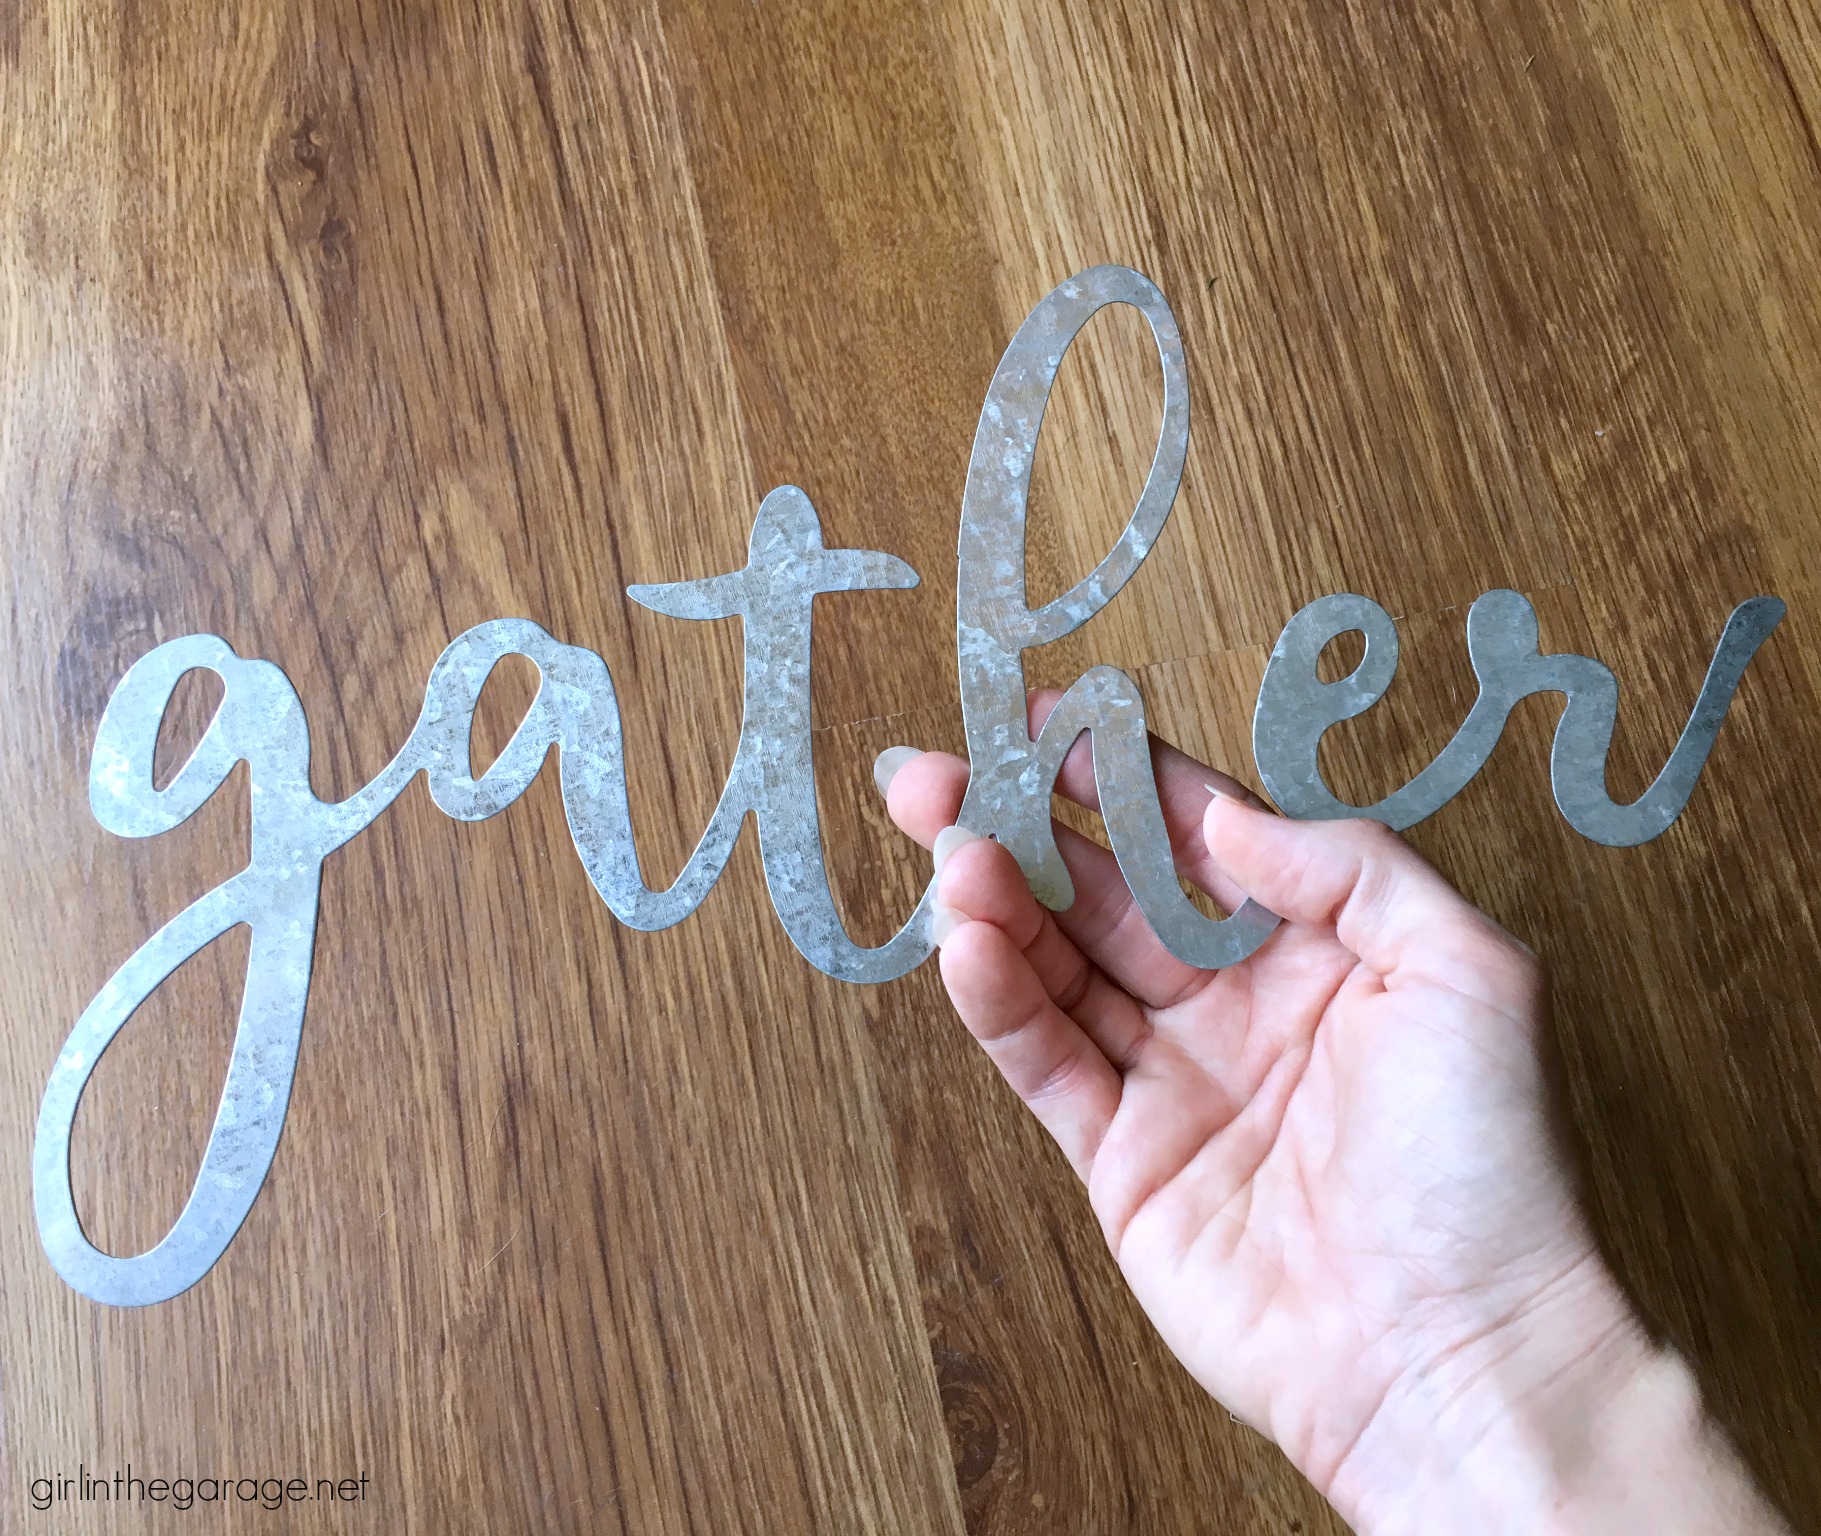 Thrifted art makeover repurposed into a planked Gather sign with farmhouse style. Easy DIY tutorial by Girl in the Garage.